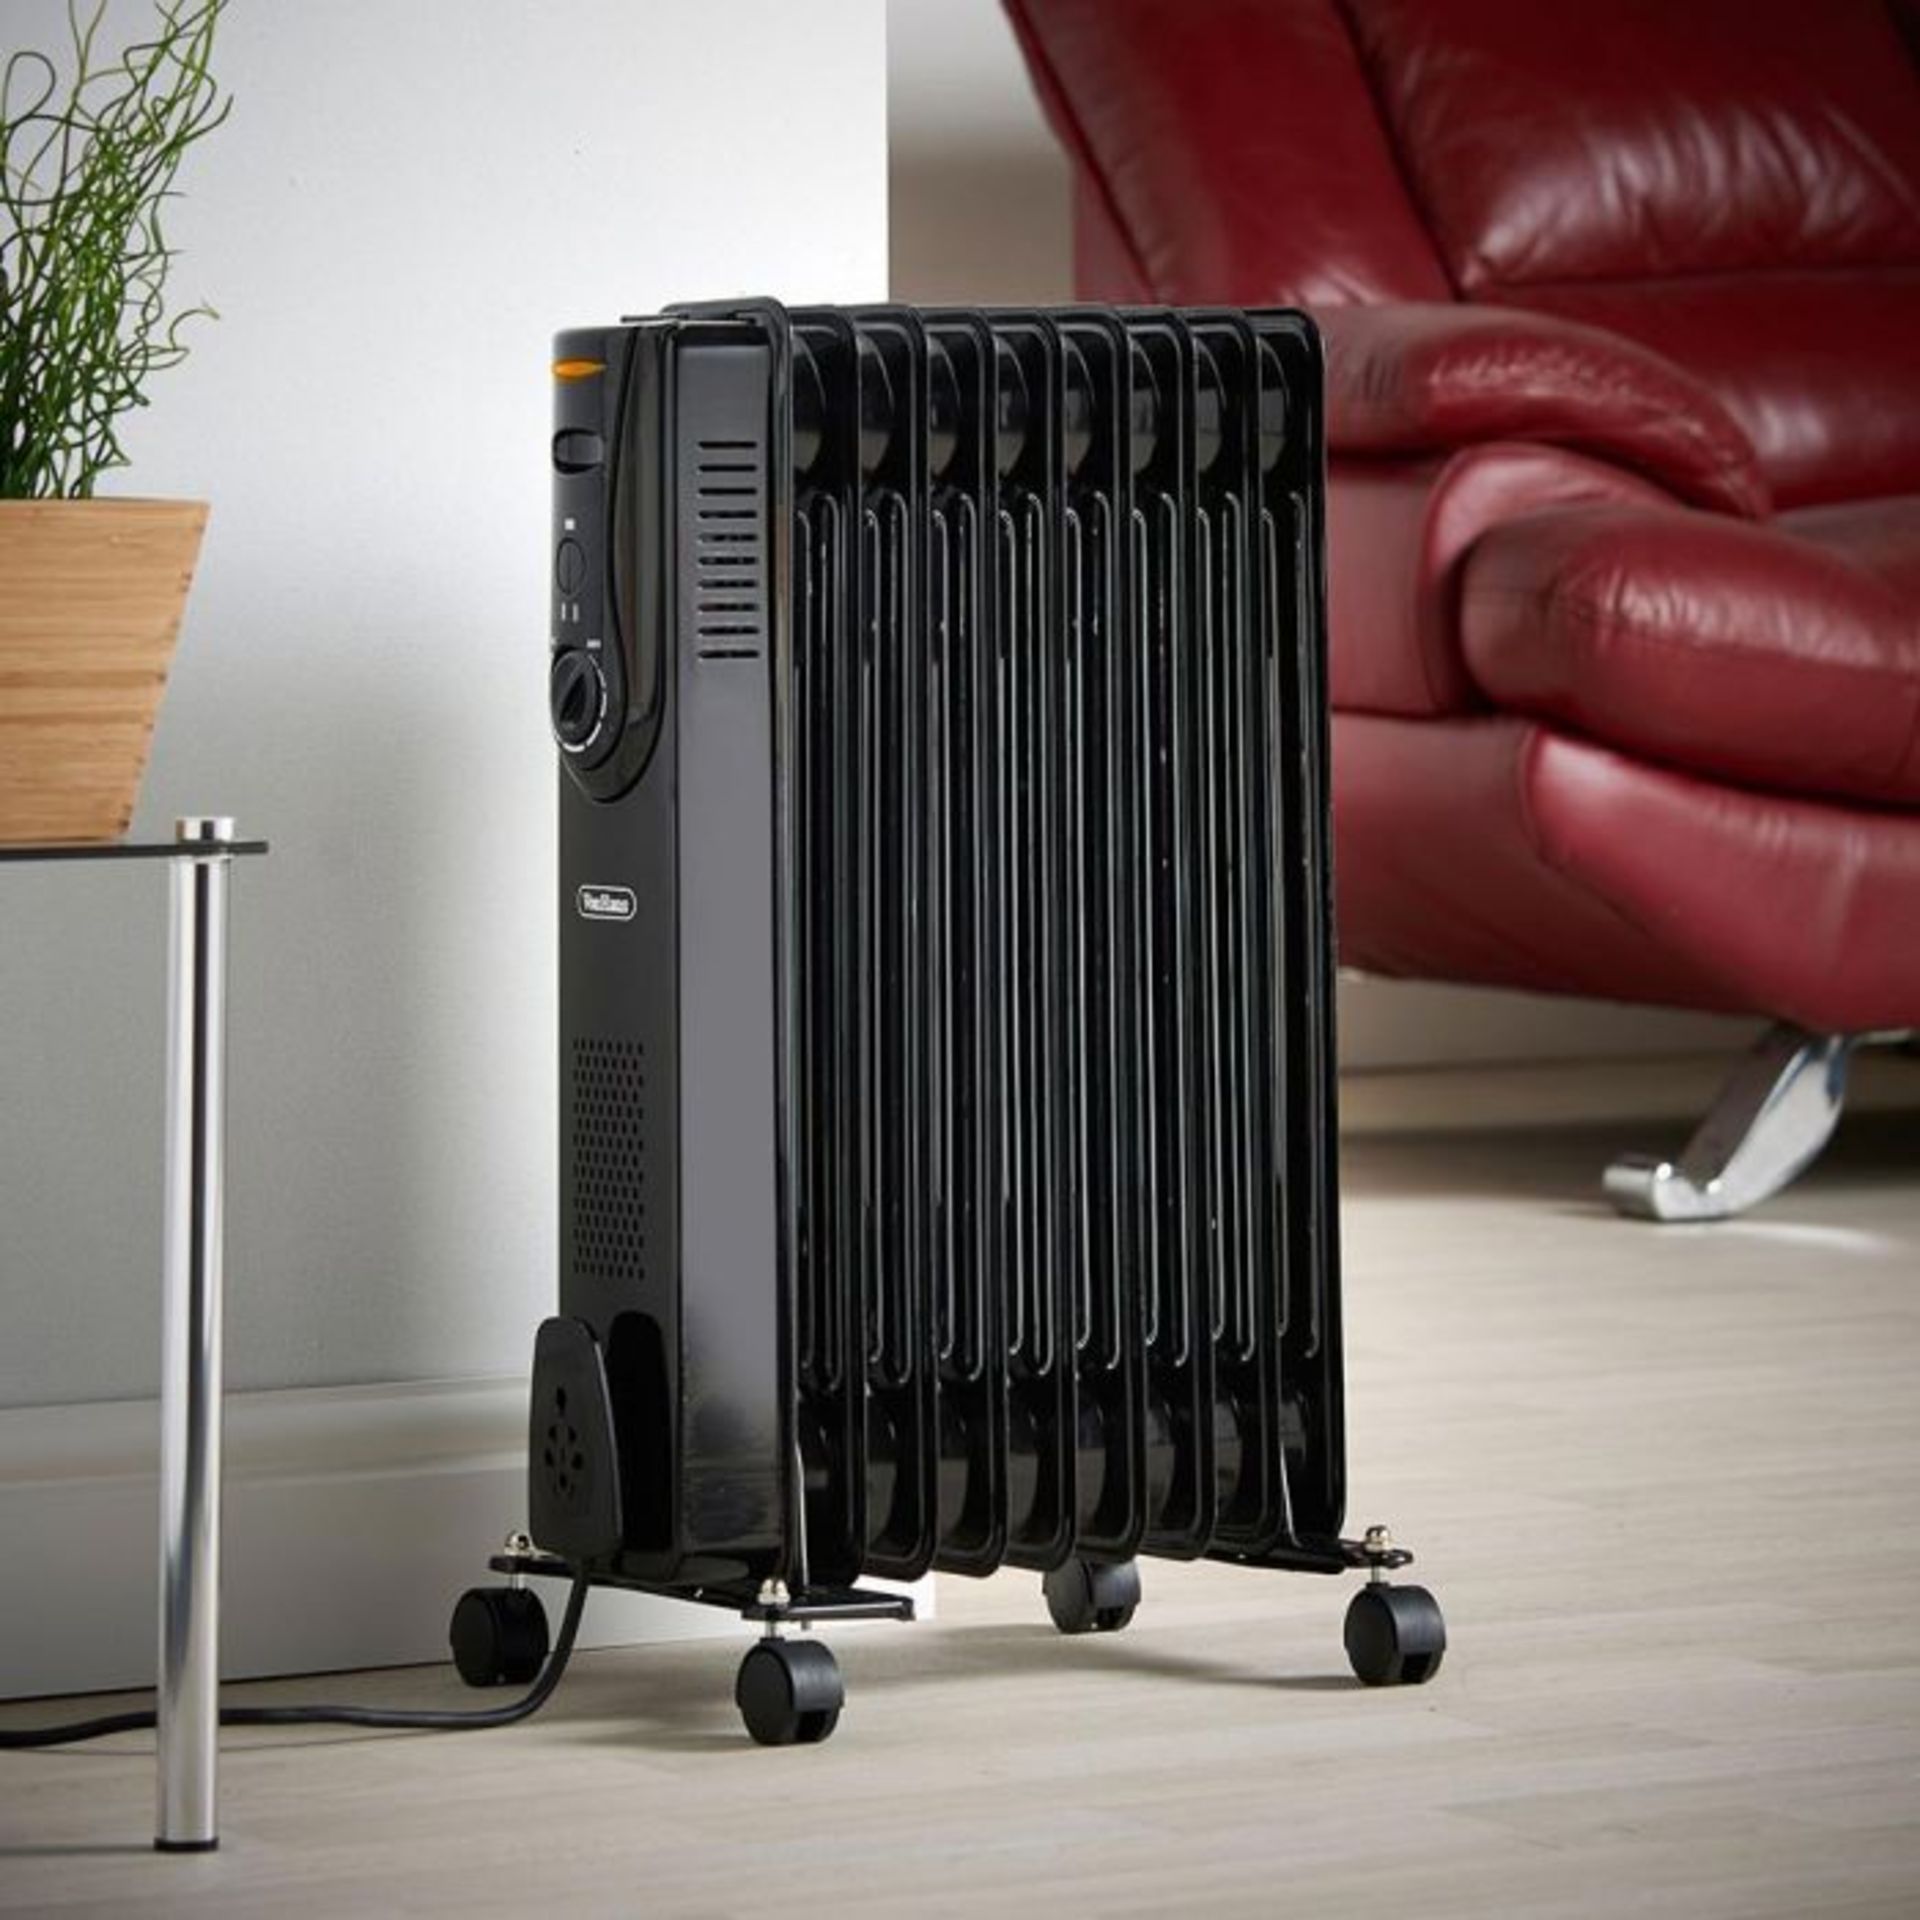 (S315) 9 Fin 2000W Oil Filled Radiator - Black Powerful 2000W radiator with 9 oil-filled fins ... - Image 5 of 8